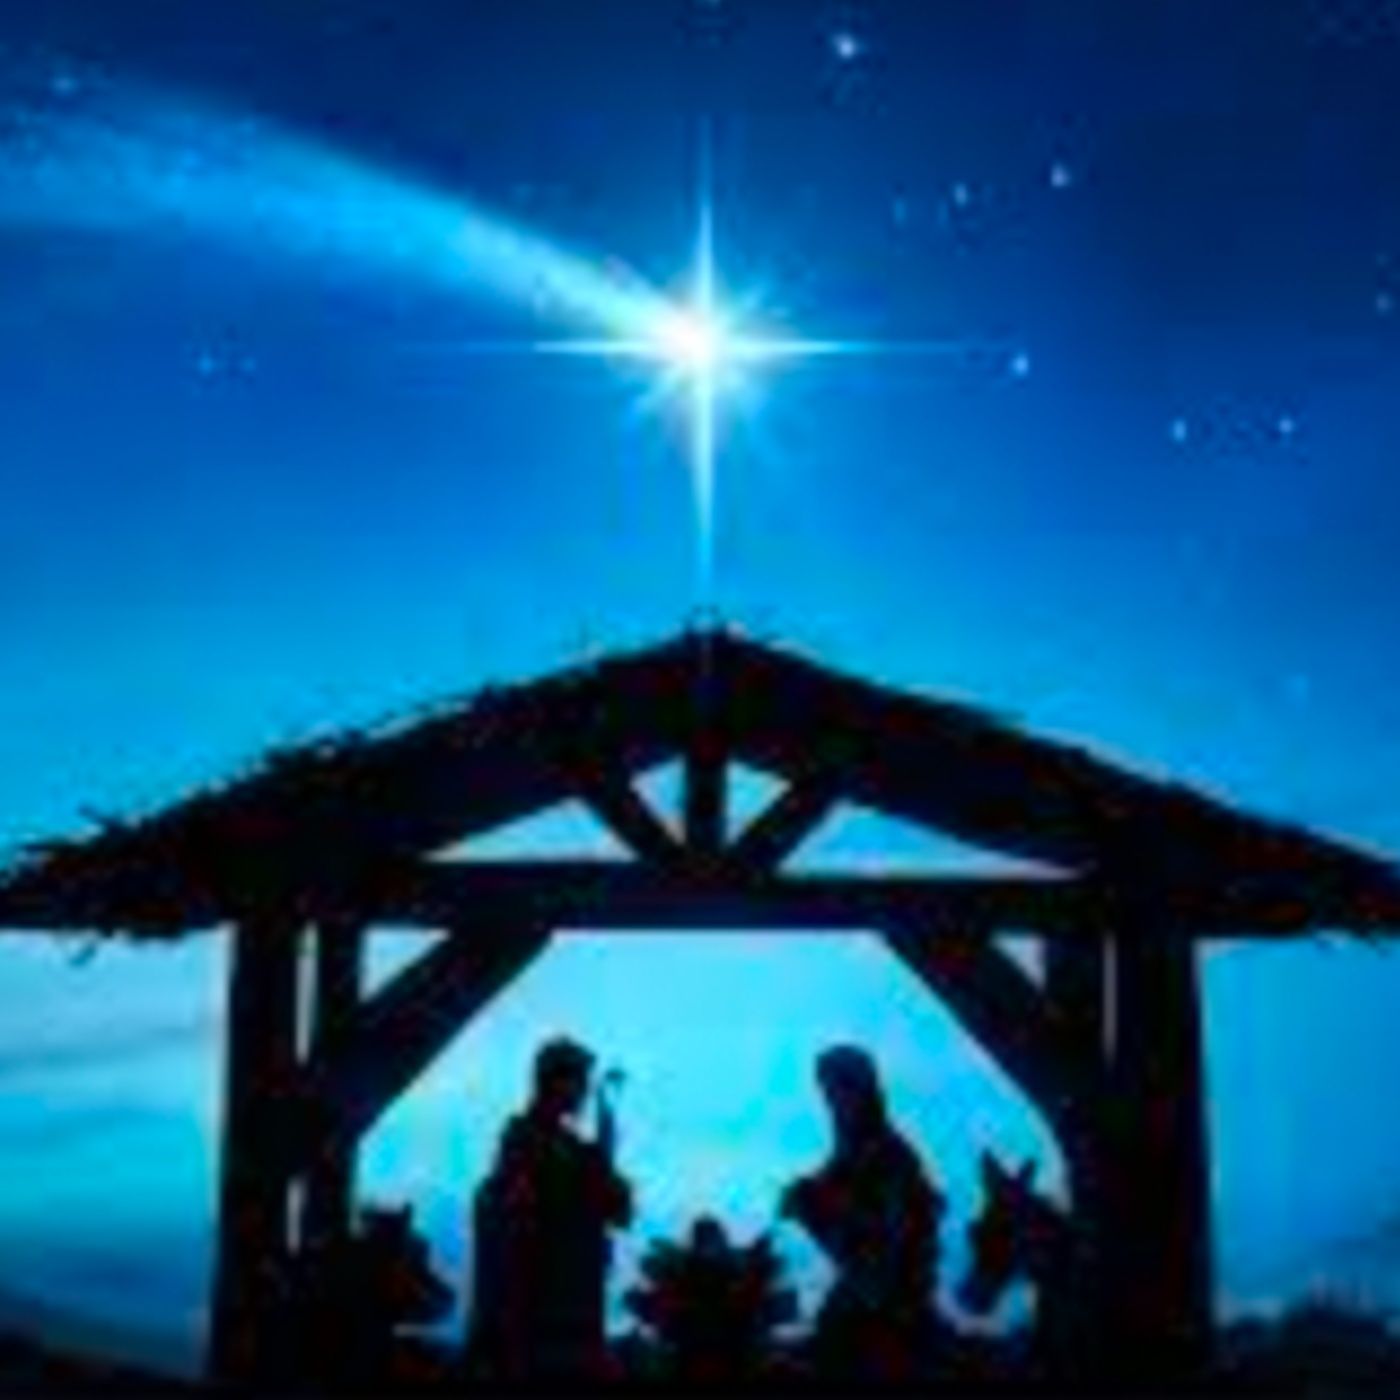 December 25: The Nativity of the Lord (Christmas)